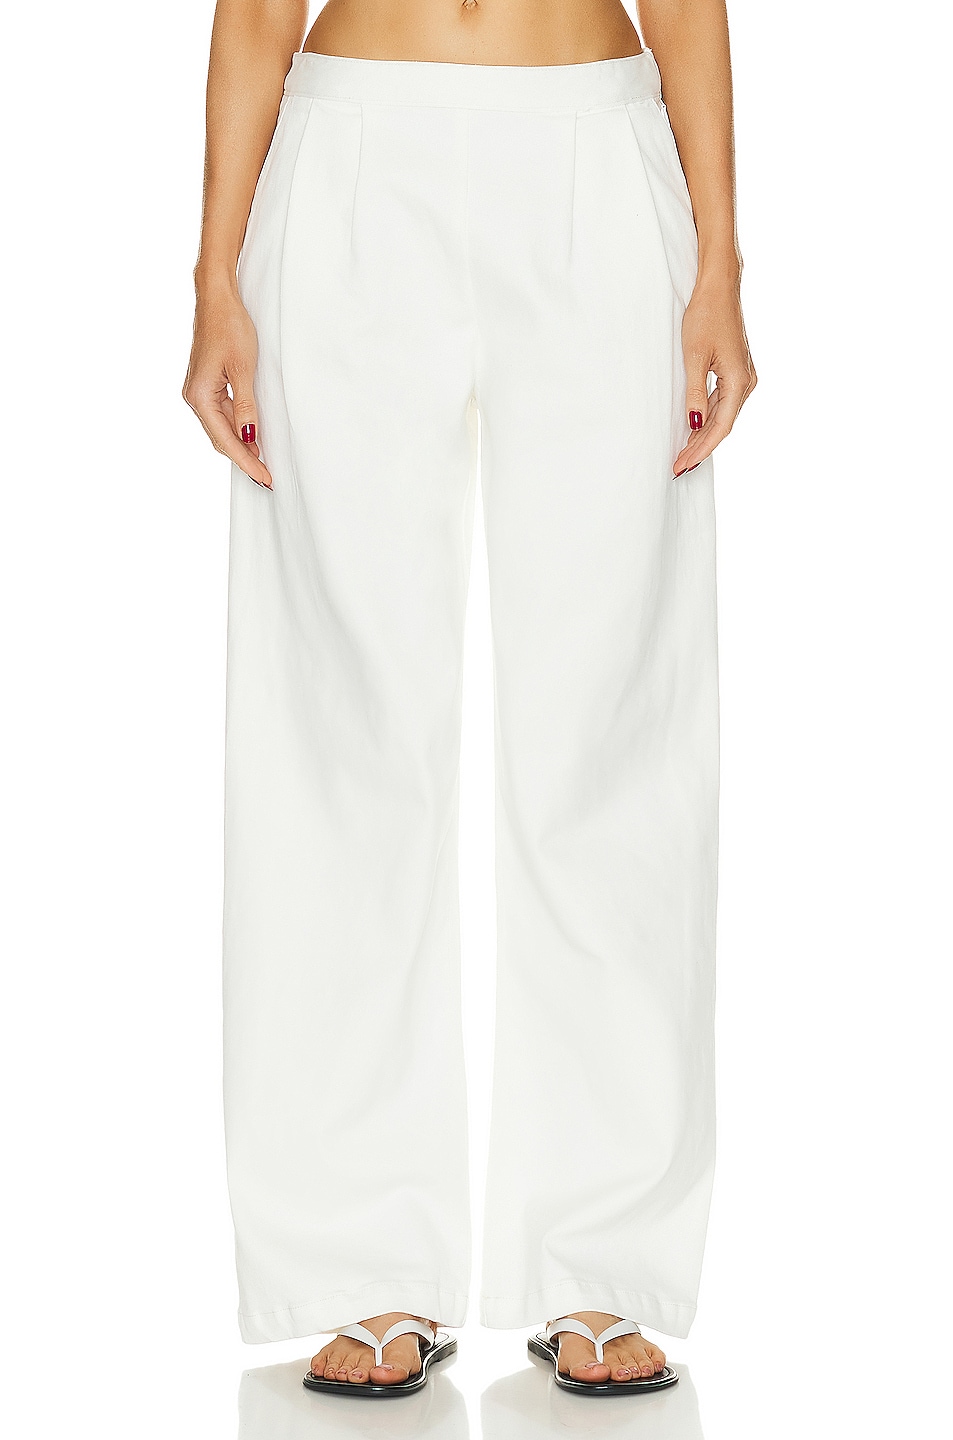 Enza Costa Soft Touch Pleated Wide Leg Pant in Undyed | FWRD